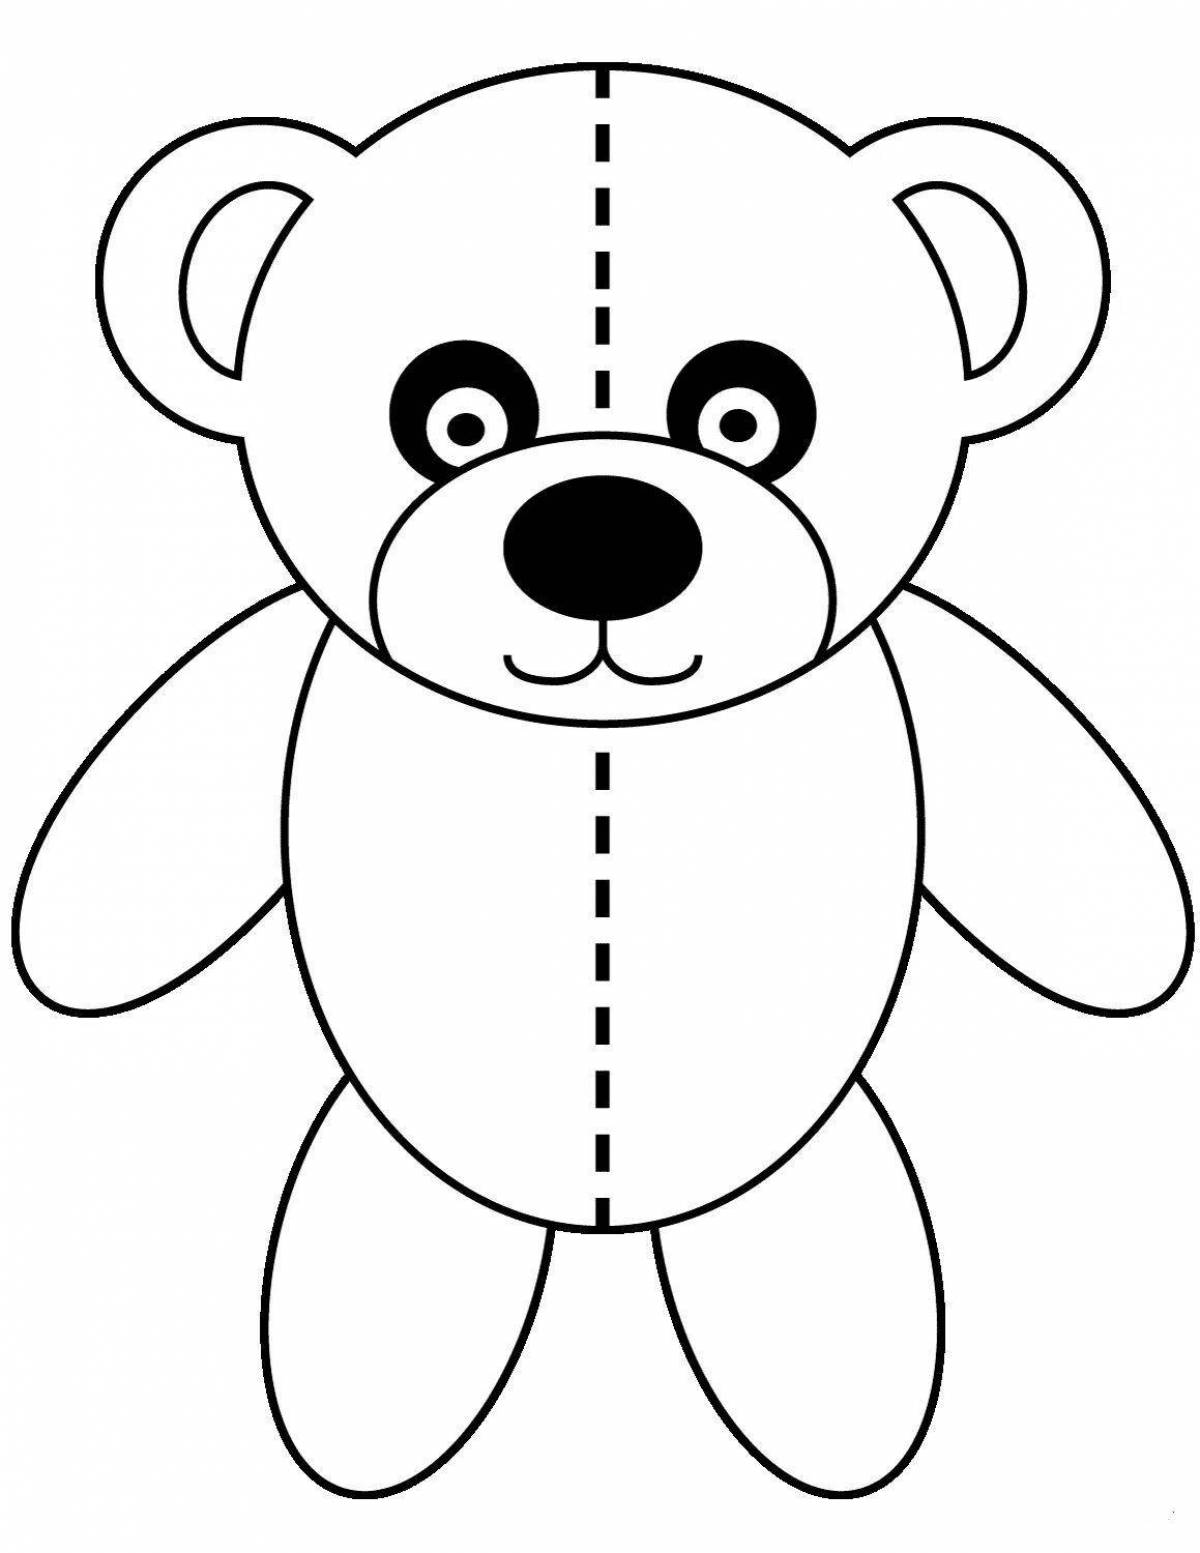 Gorgeous bear coloring book for 2-3 year olds